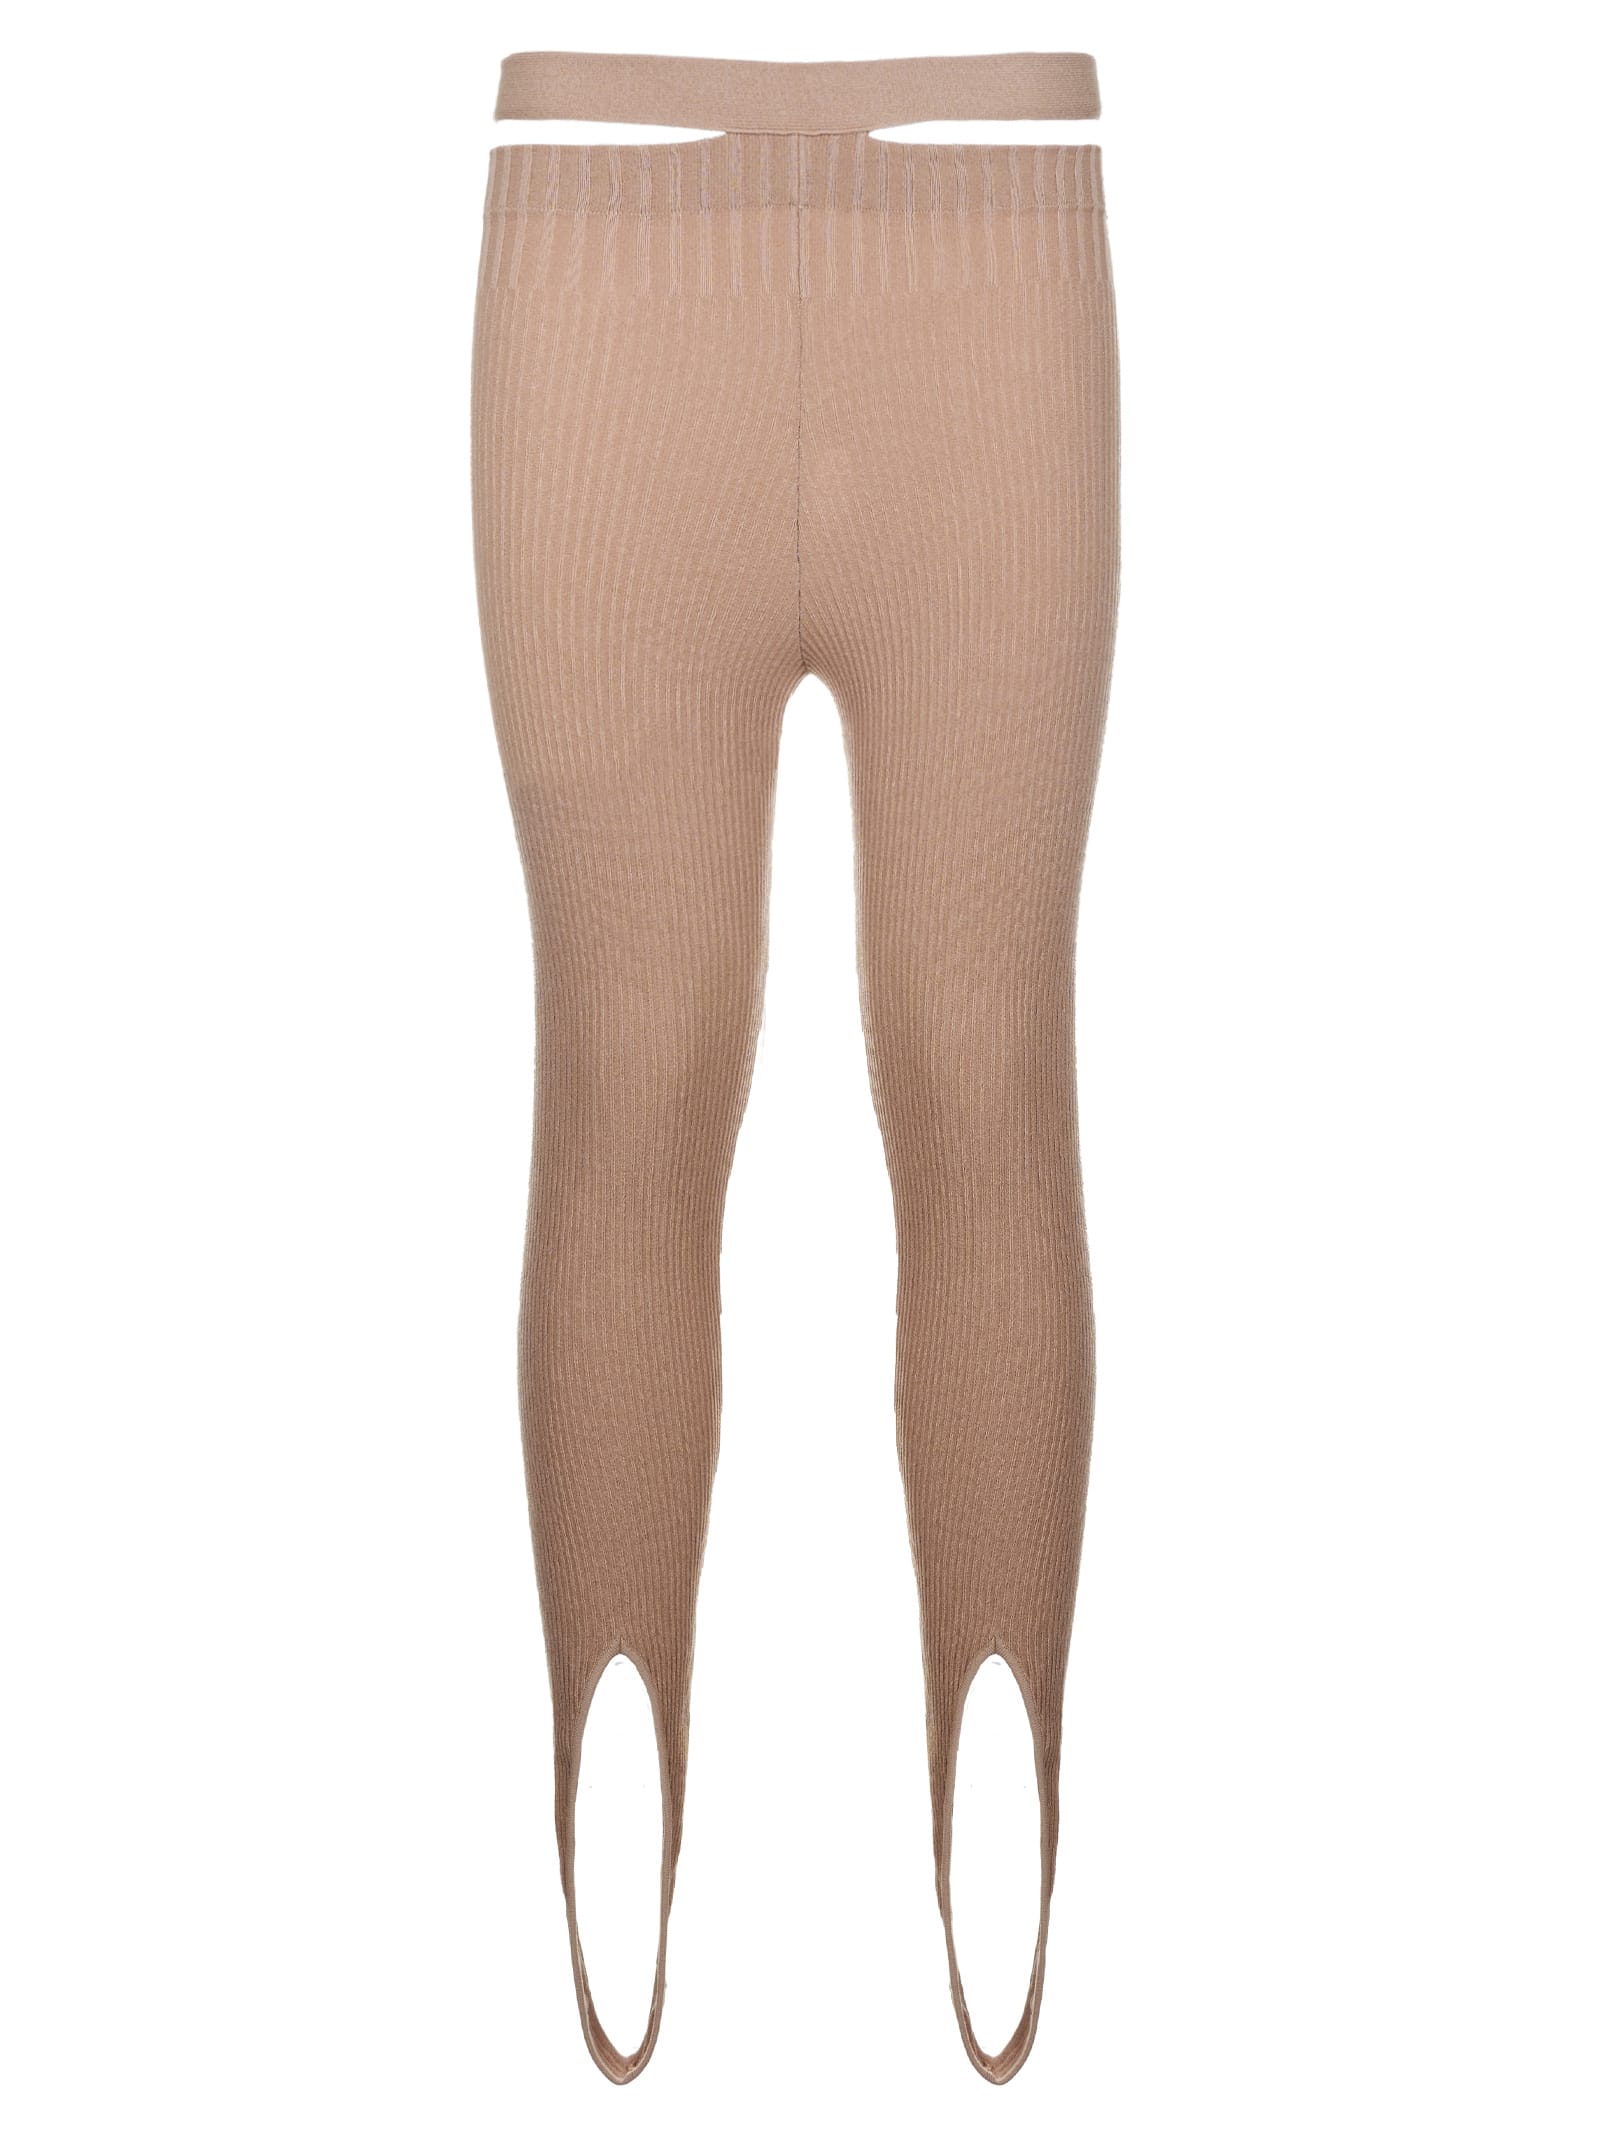 Andrea Adamo Ribbed Knit Leggings With Cut-out Belt